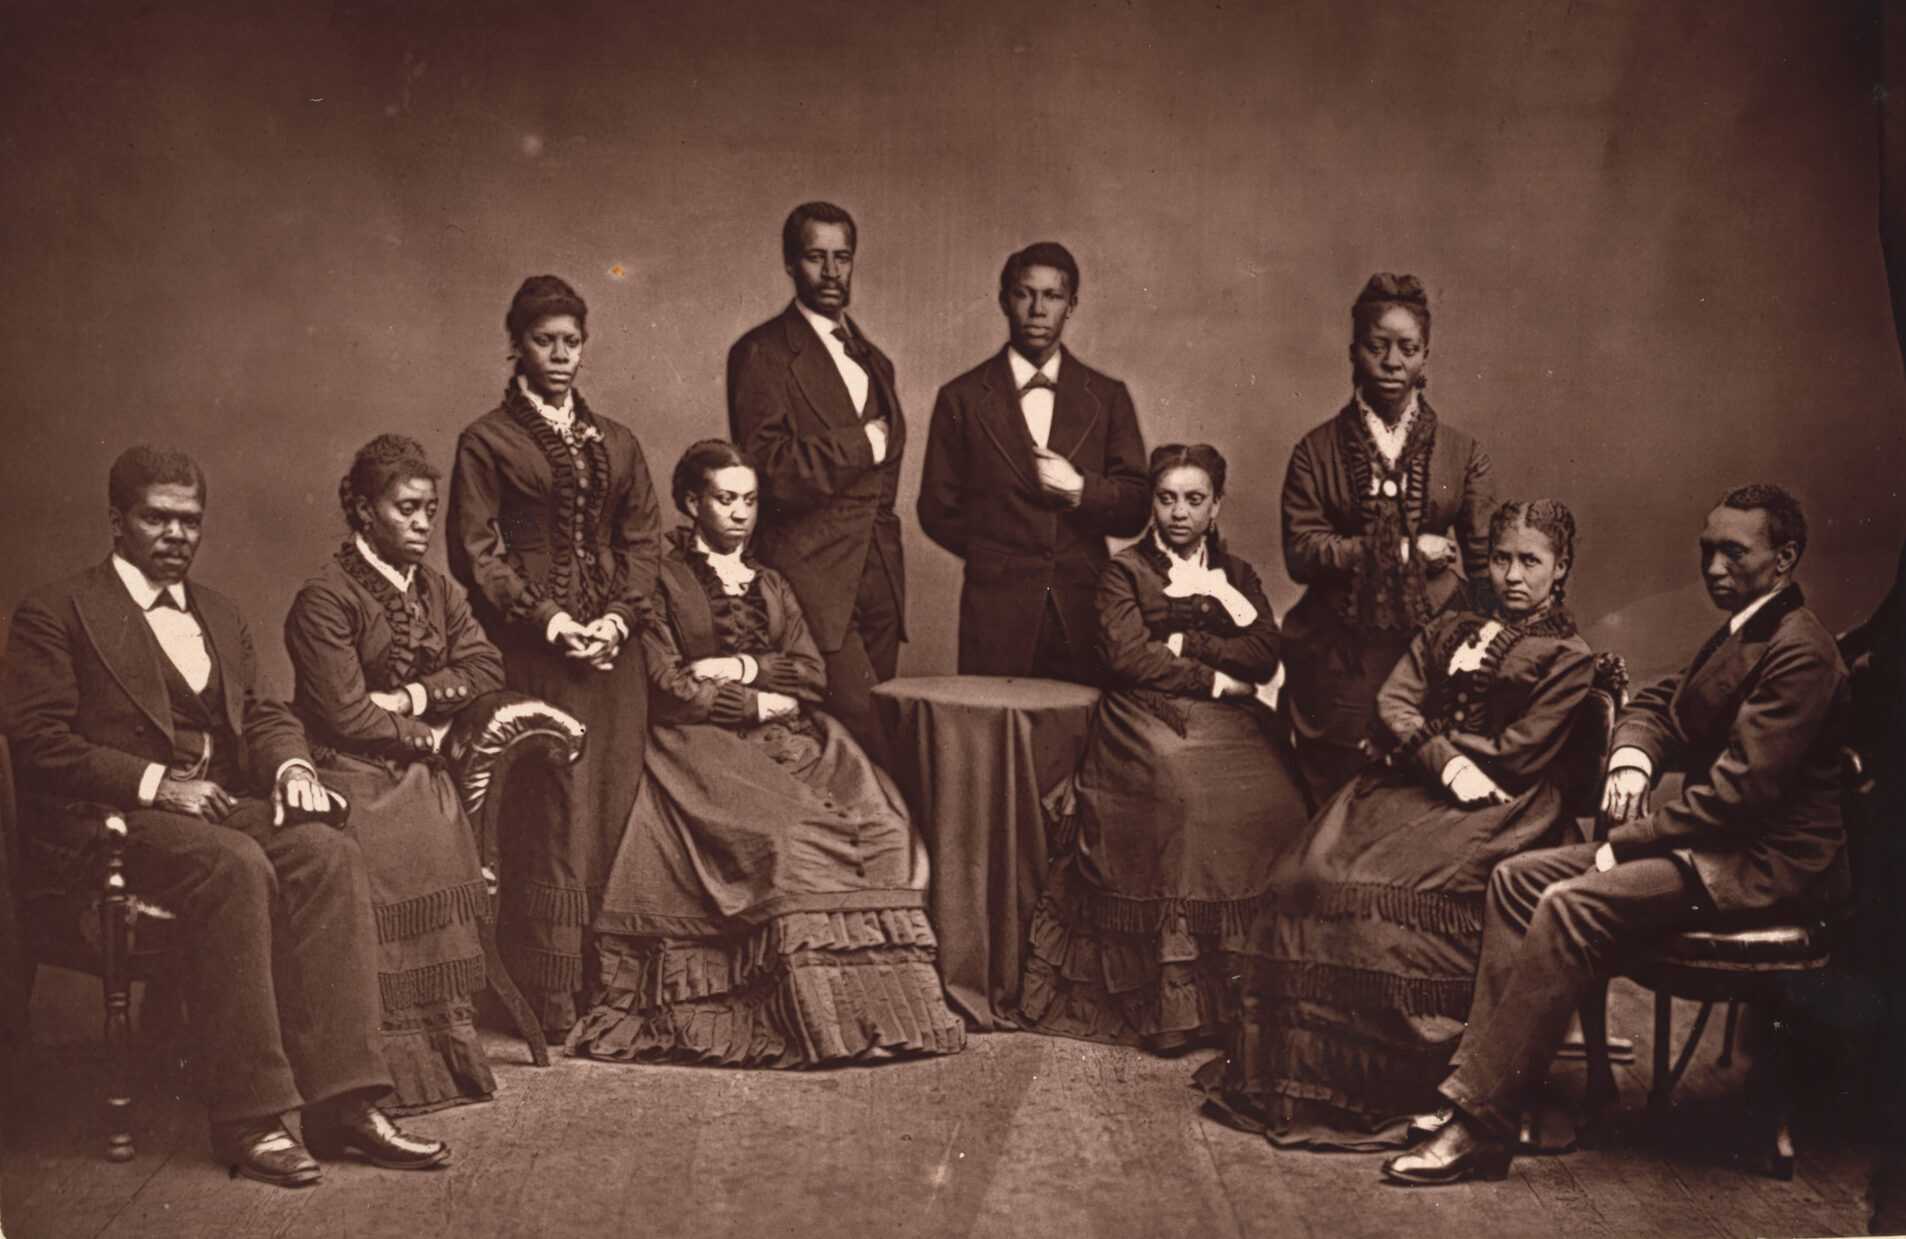 A black and white posed, portrait of Fisk Jubilee Singers. Some are standing while others are sitting.